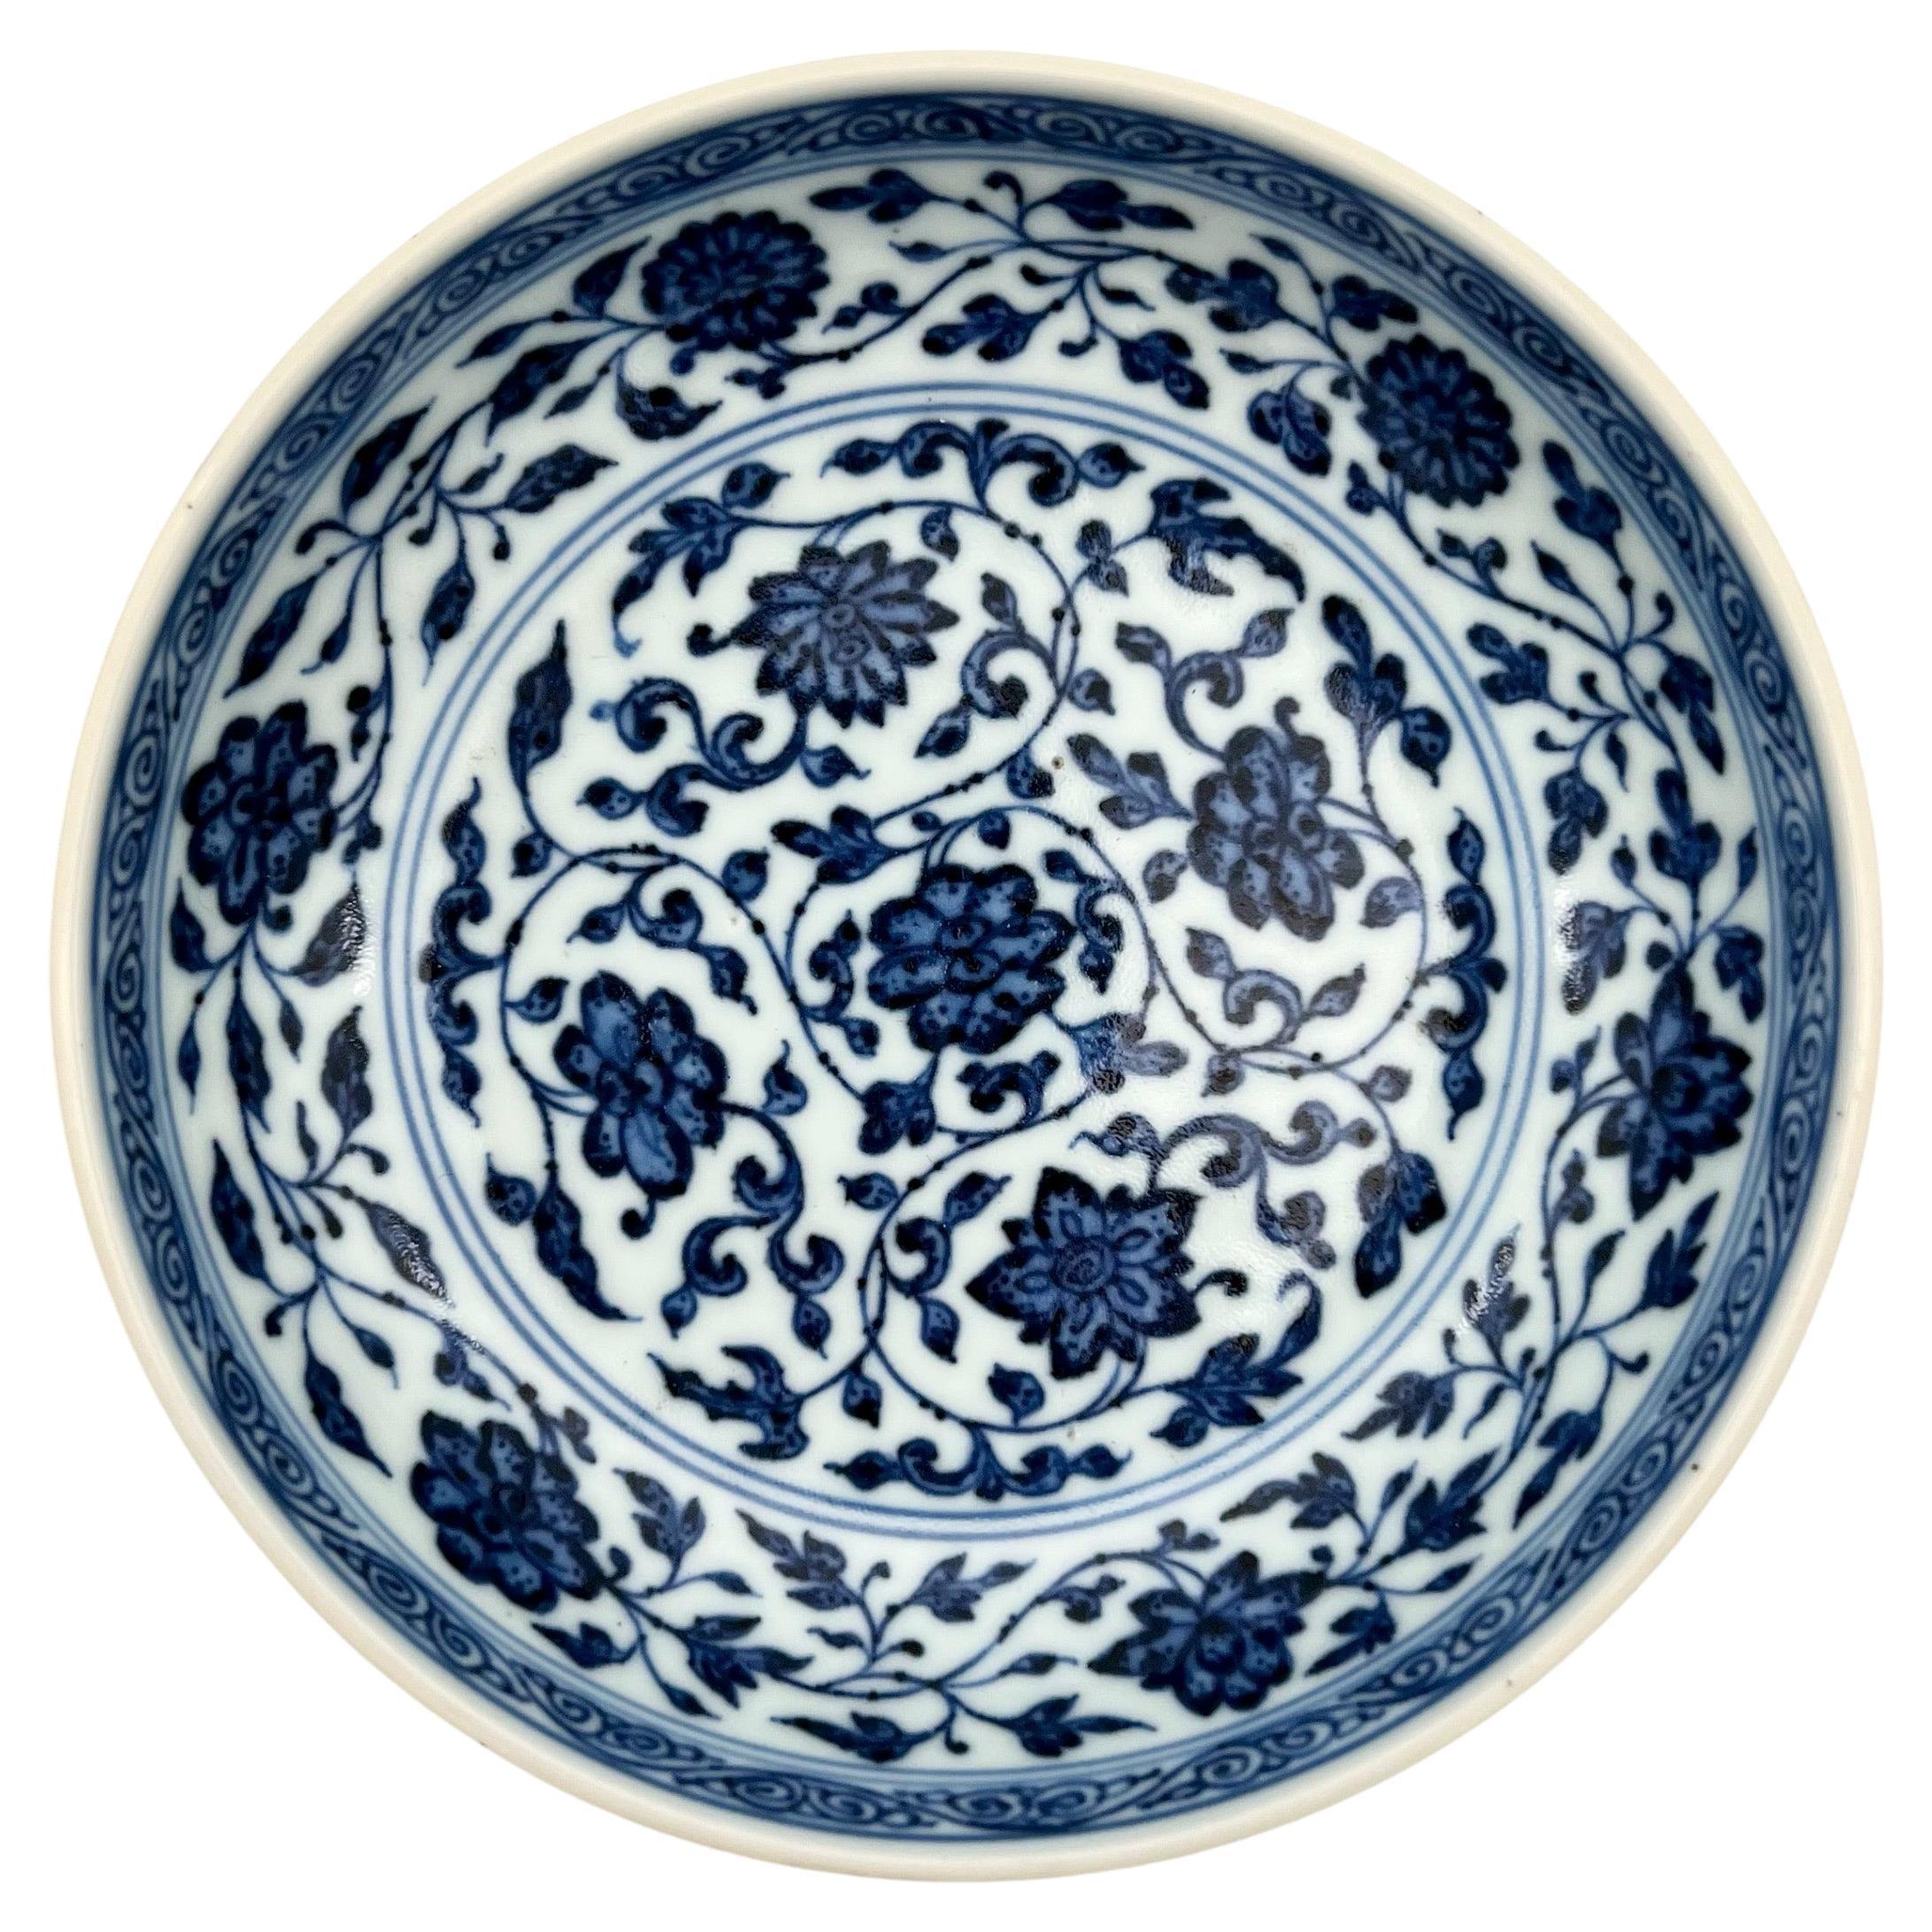 Blue and White Ming-Style Dish, Qianlong Mark and Period, China 1736 - 1795